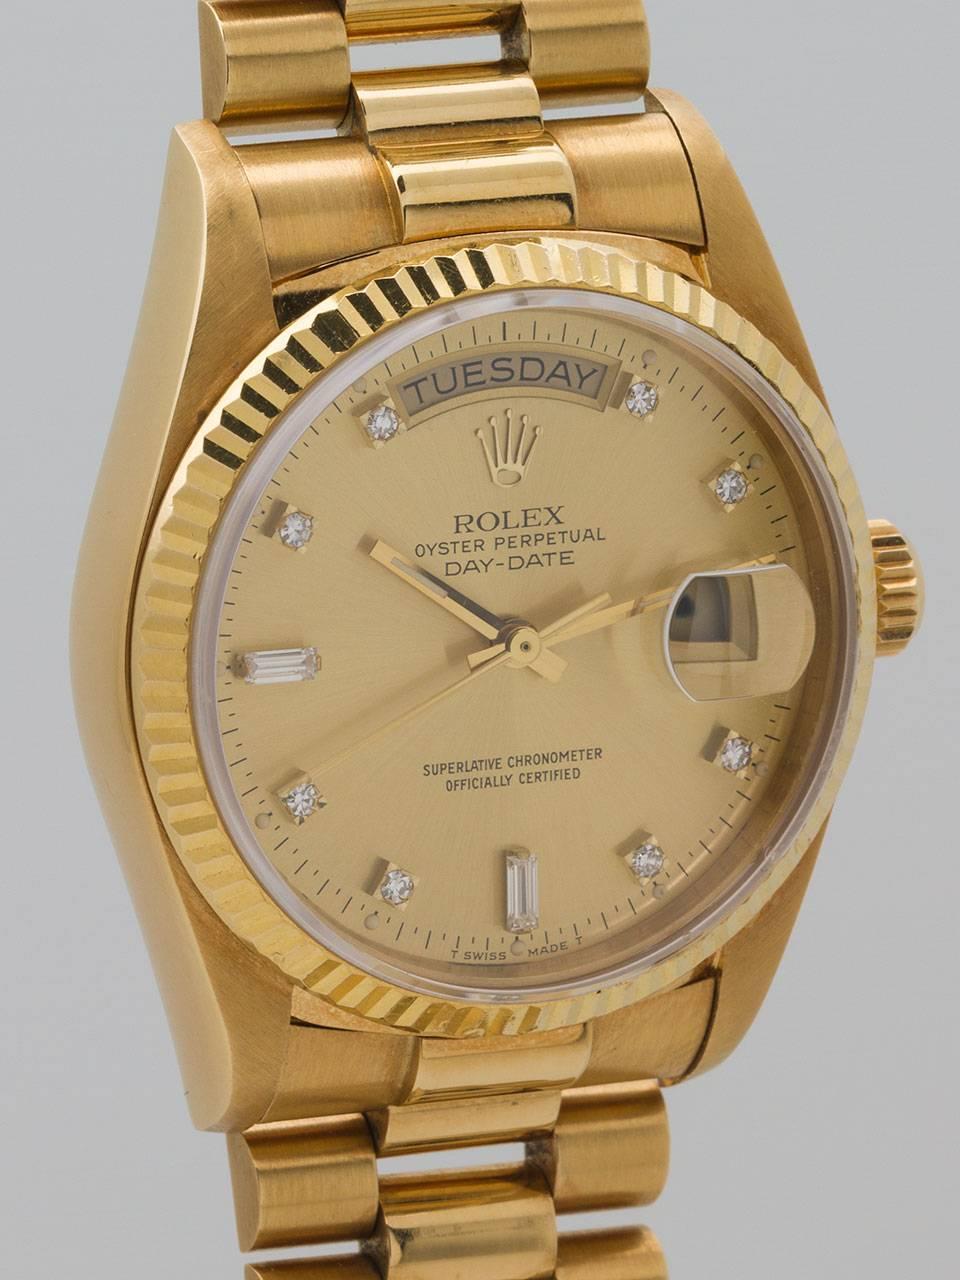 Rolex 18K Yellow Gold Day Date President Wristwatch ref 18038 serial # 9.5 million circa 1986. 36mm full size period man’s model with fluted bezel and sapphire crystal. Original factory champagne dial with original diamond indexes. Powered by self